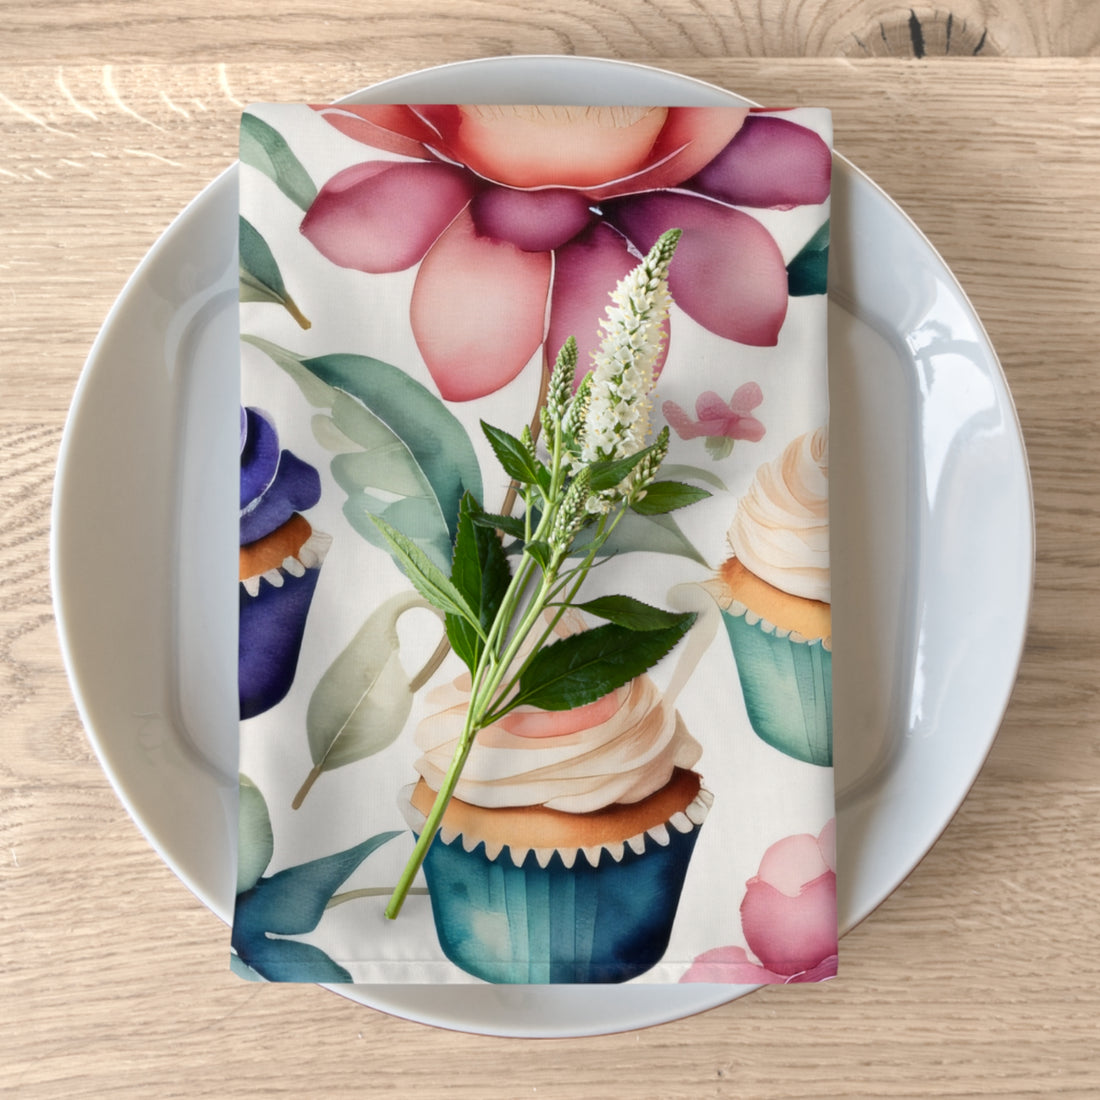 Delightful Blooms and Sweets Napkins